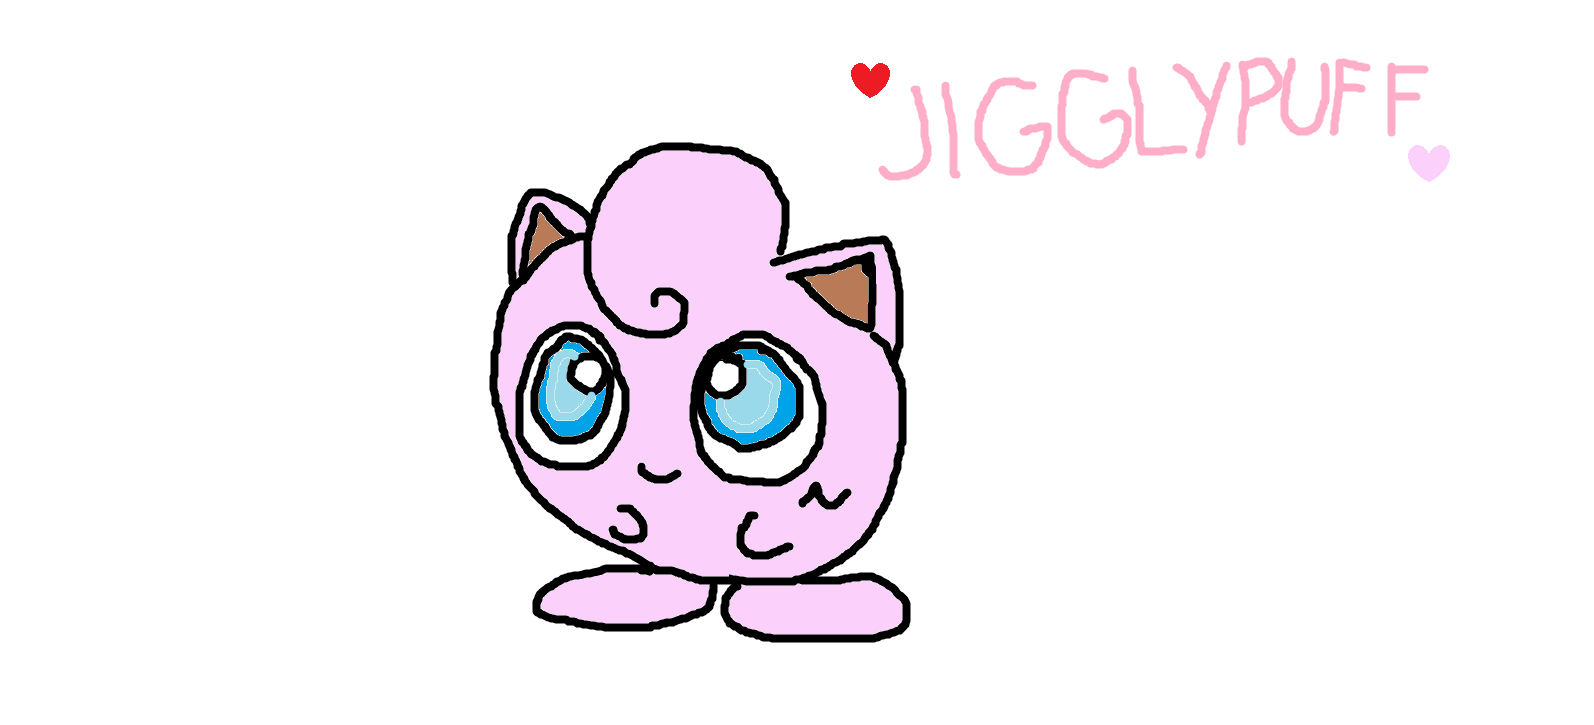 Jigglypuff Image HD Wallpaper And Background